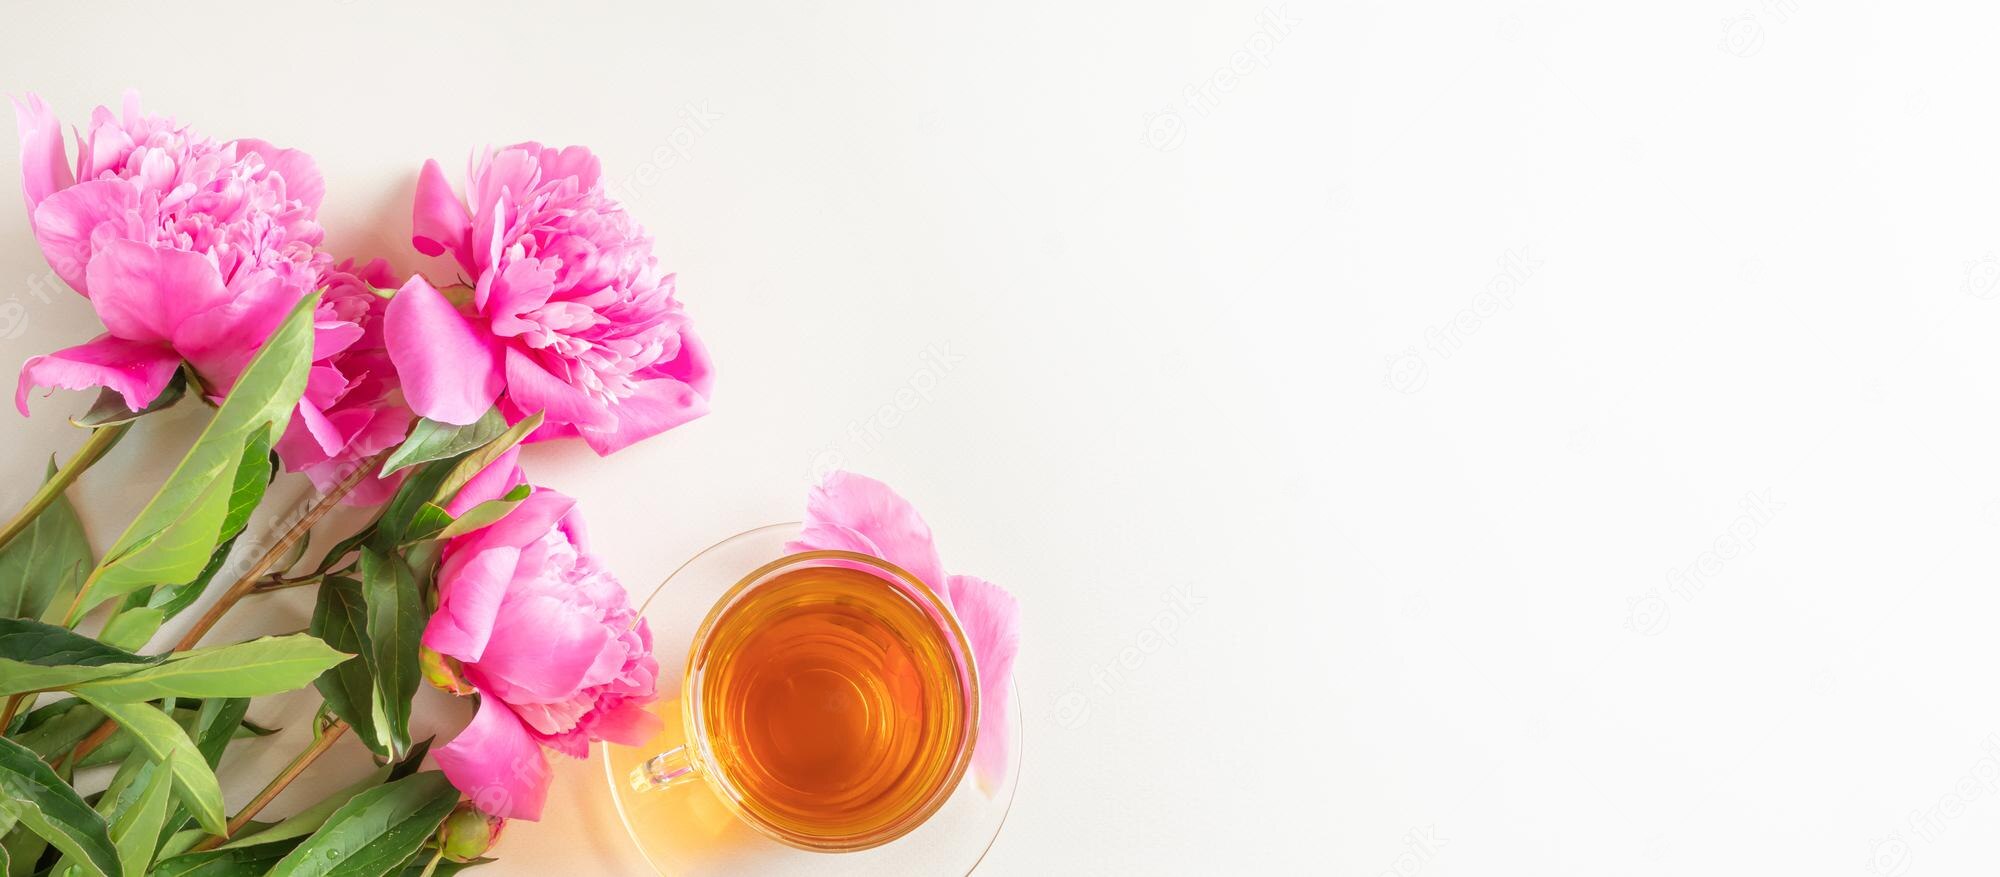 Premium Photo. Bright fresh pink peonies and a cup of tea in a transparent cup and saucer on a light background. copyspace, top view. cute cozy elegant female flat lay